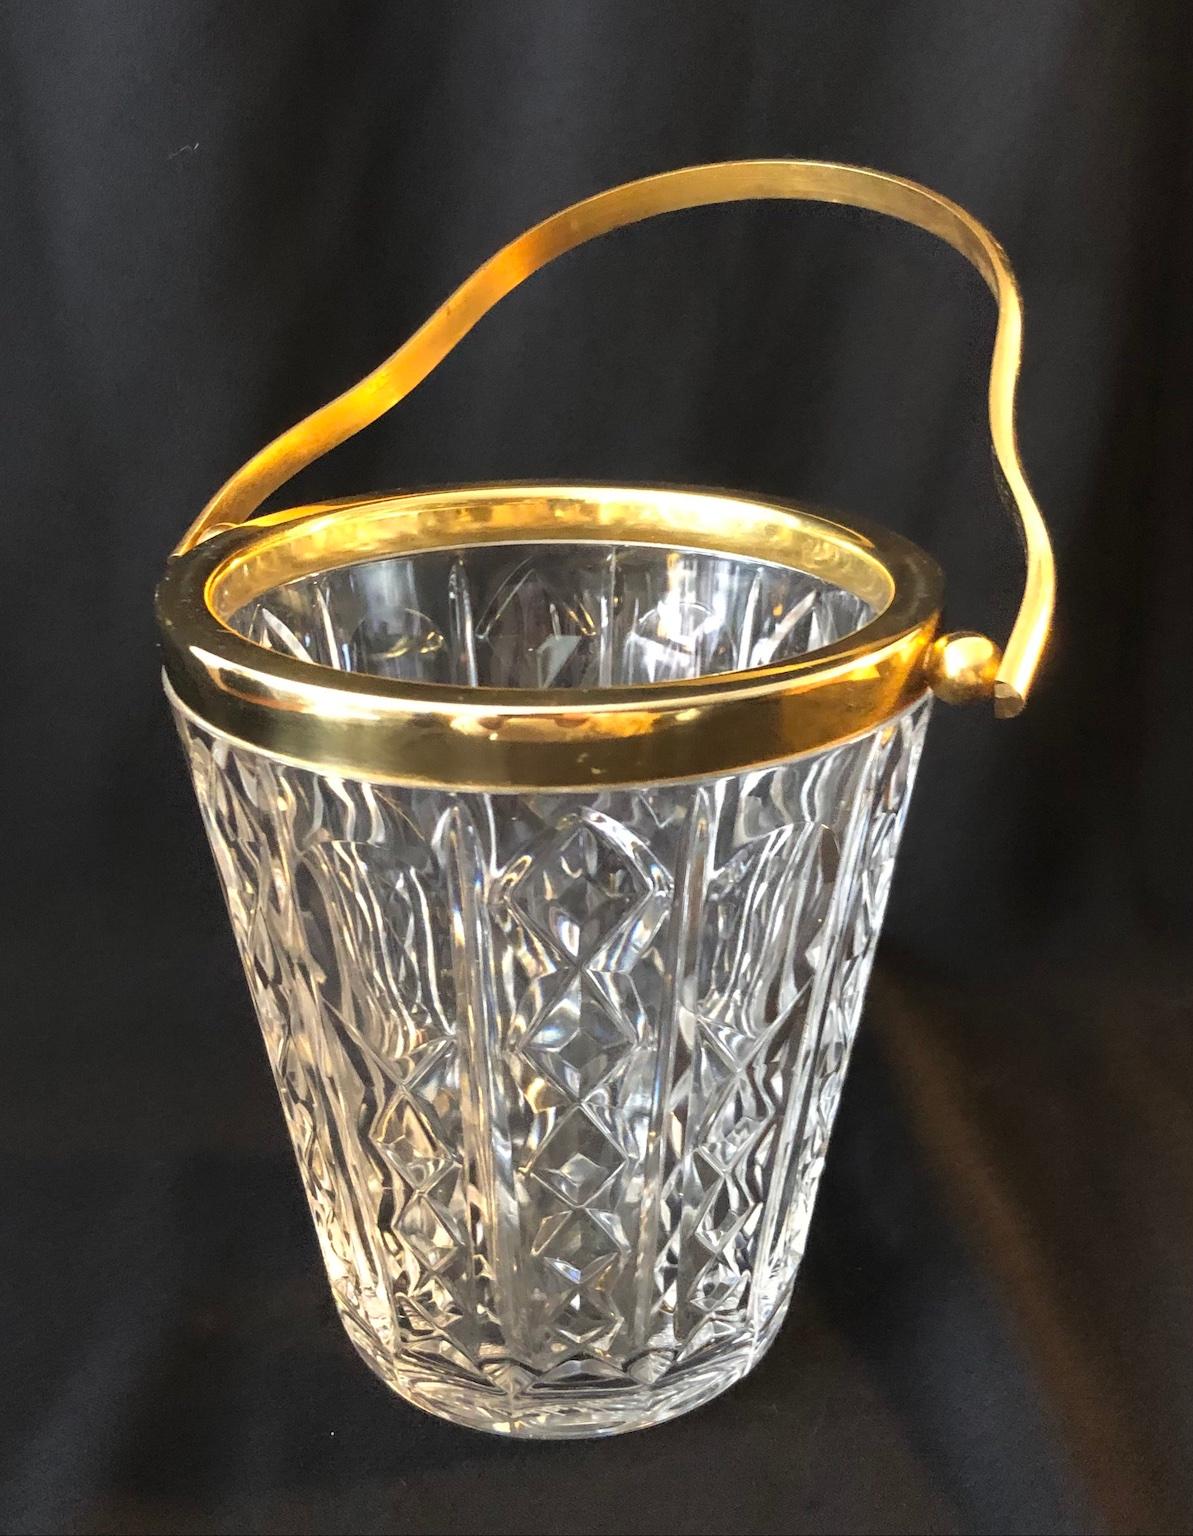 Midcentury Val St Lambert crystal and gold-plated cocktail ice bucket, barware, Belgium, 1950s.

A beautifully cut crystal ice bucket, made in Belgium by the prestigious house Val Saint Lambert, circa 1950s.

This excellent quality ice bucket,